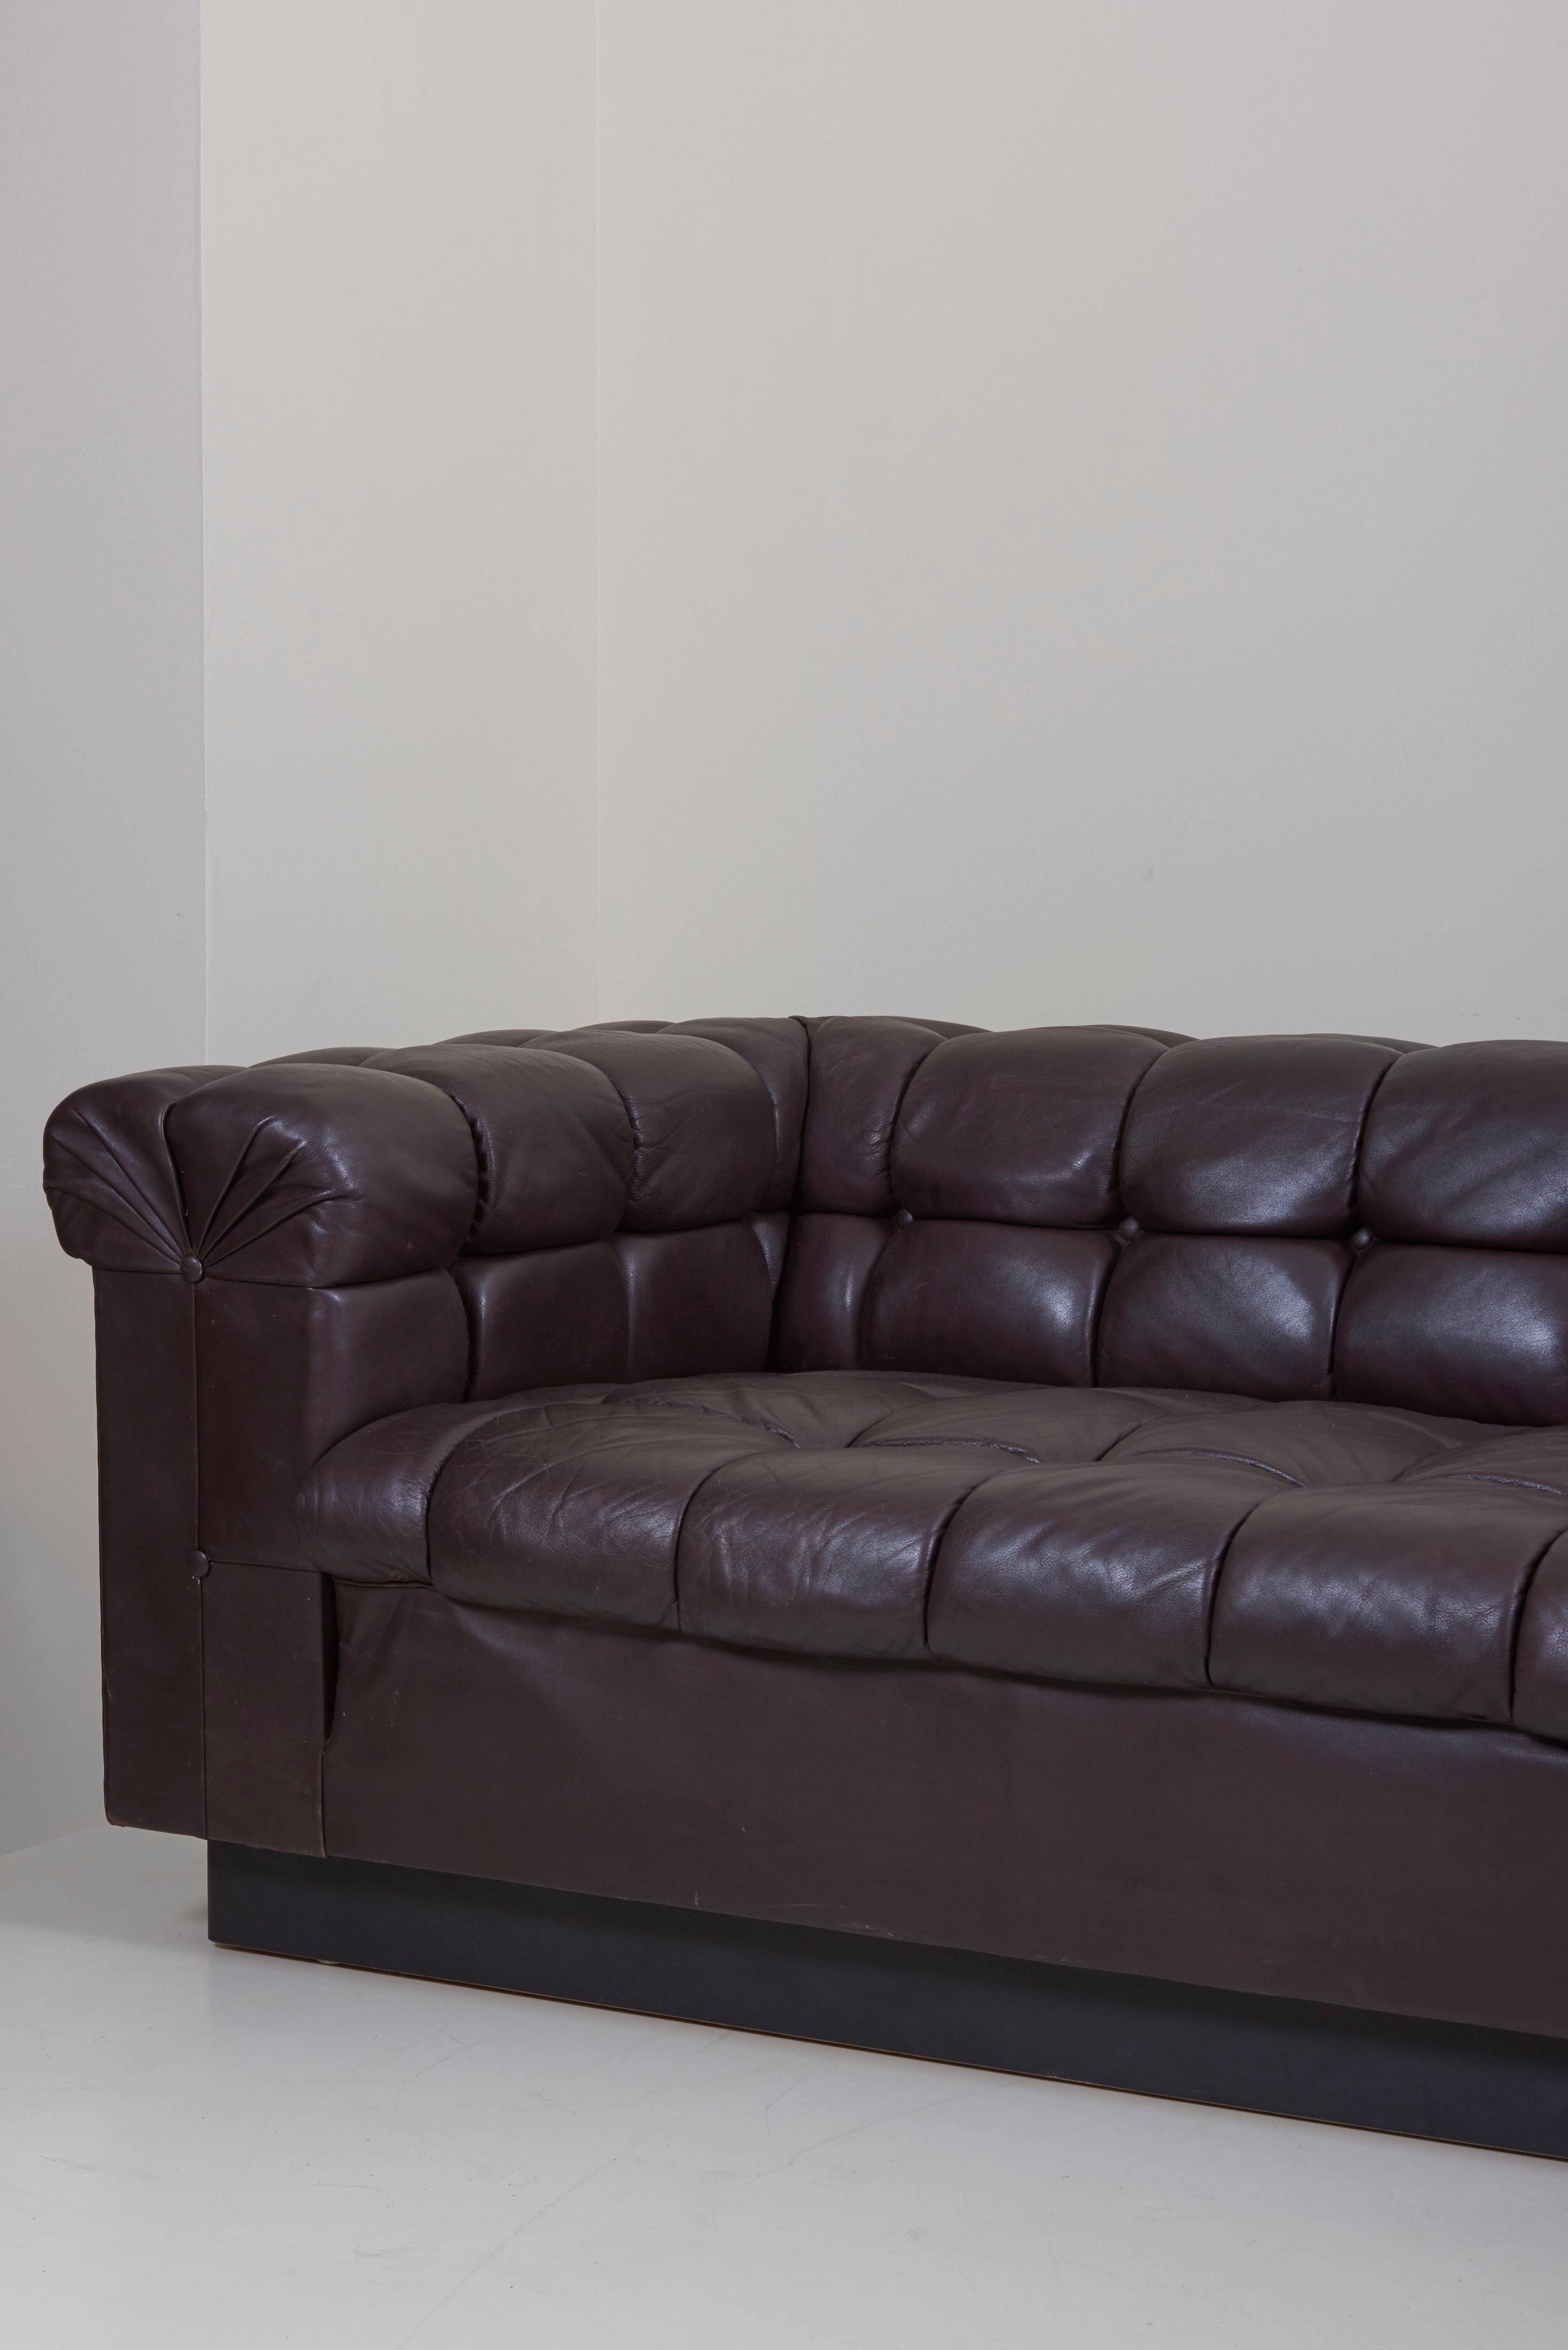 Mid-Century Modern Party Sofa Model 5407 in Dark Brown Leather by Edward Wormley for Dunbar